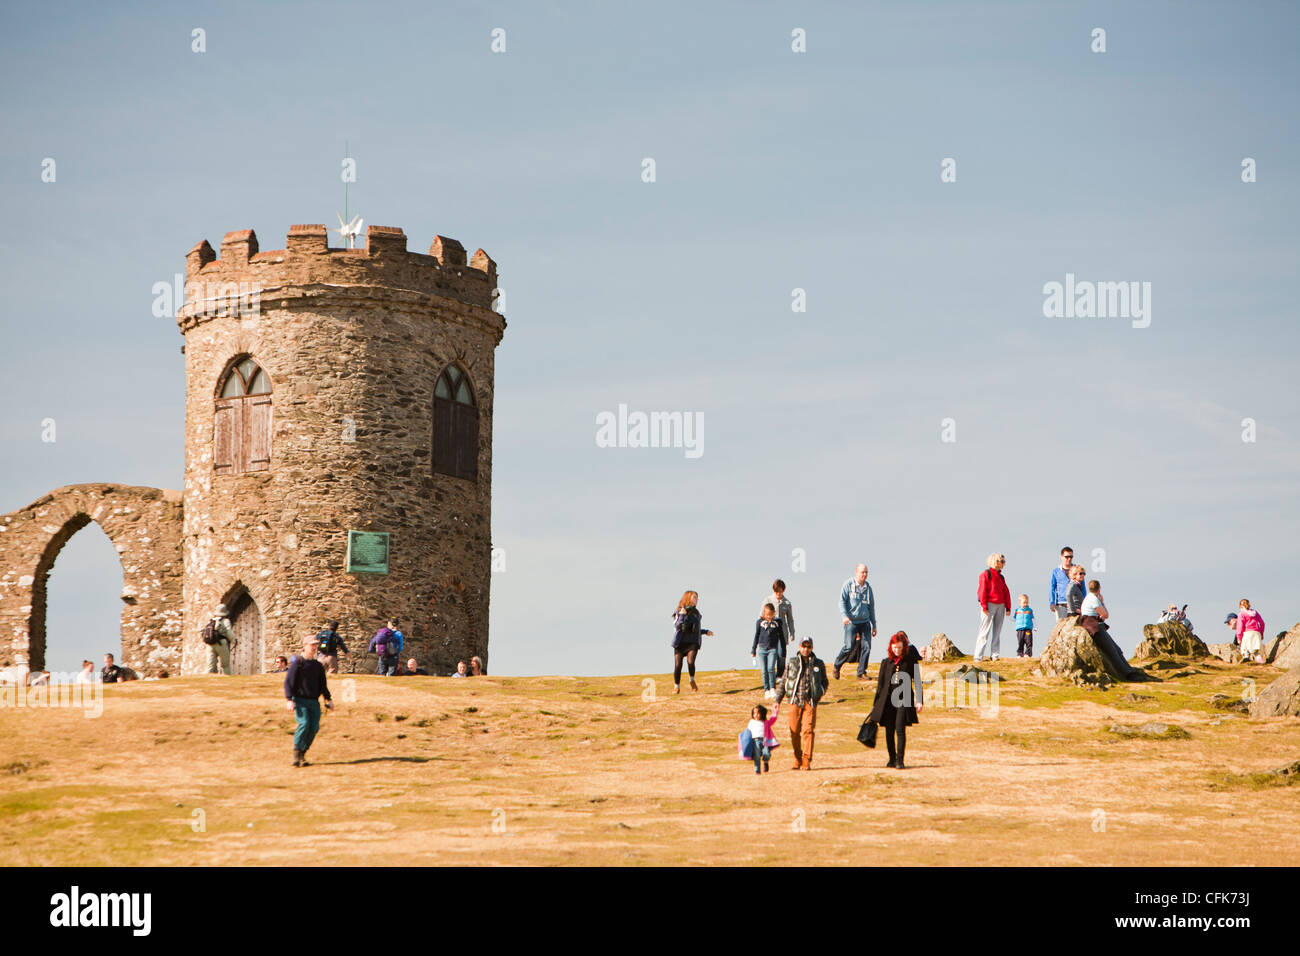 Old John Tower built in 1784 in Bradgate Park in Leicesterhsire by the Earl of Stamford. Stock Photo